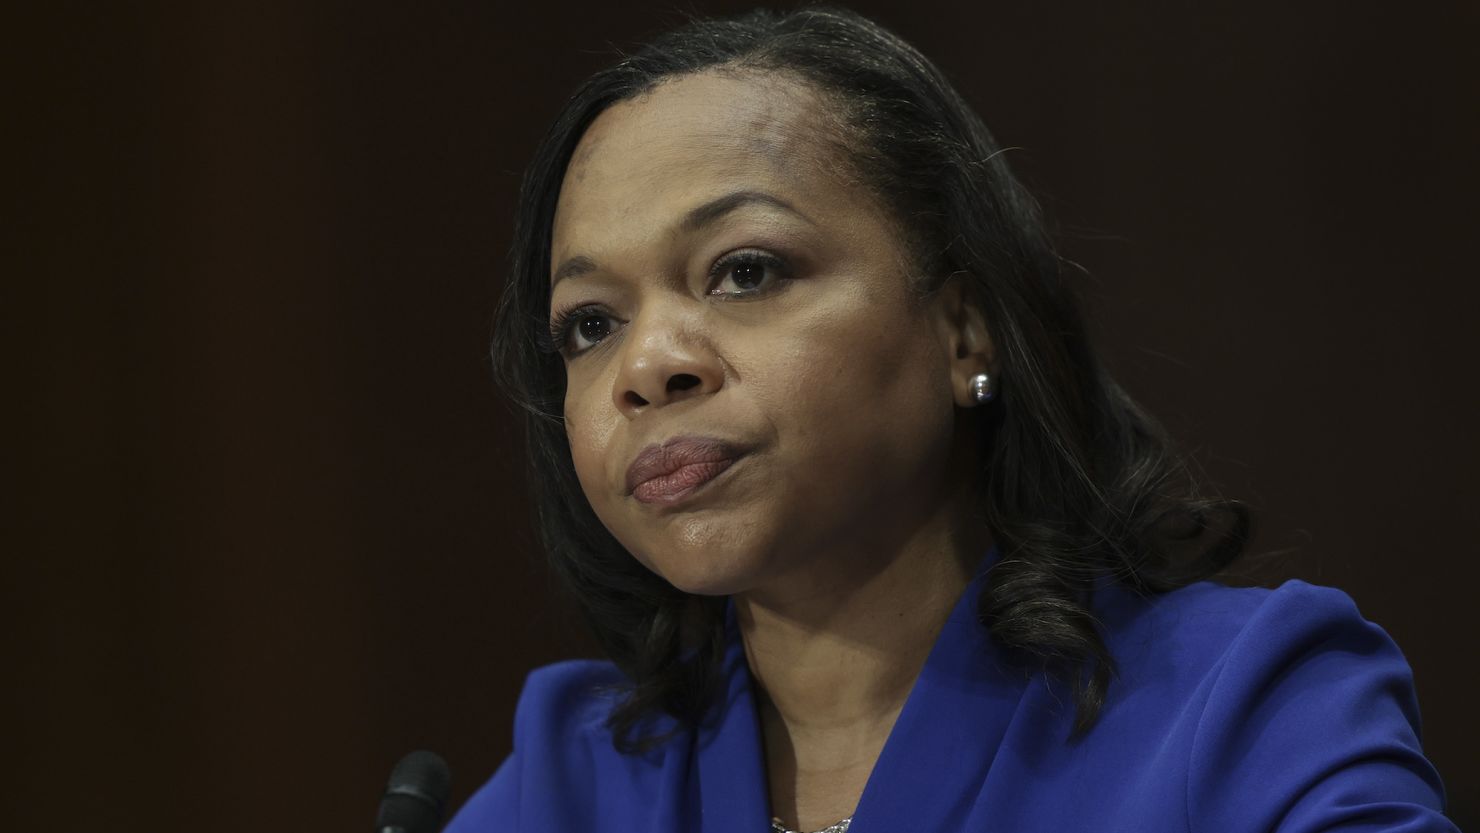 US Assistant Attorney General Kristen Clarke testifies before the Senate Judiciary Committee at the Dirksen Senate Office Building on March 8, 2022 in Washington.